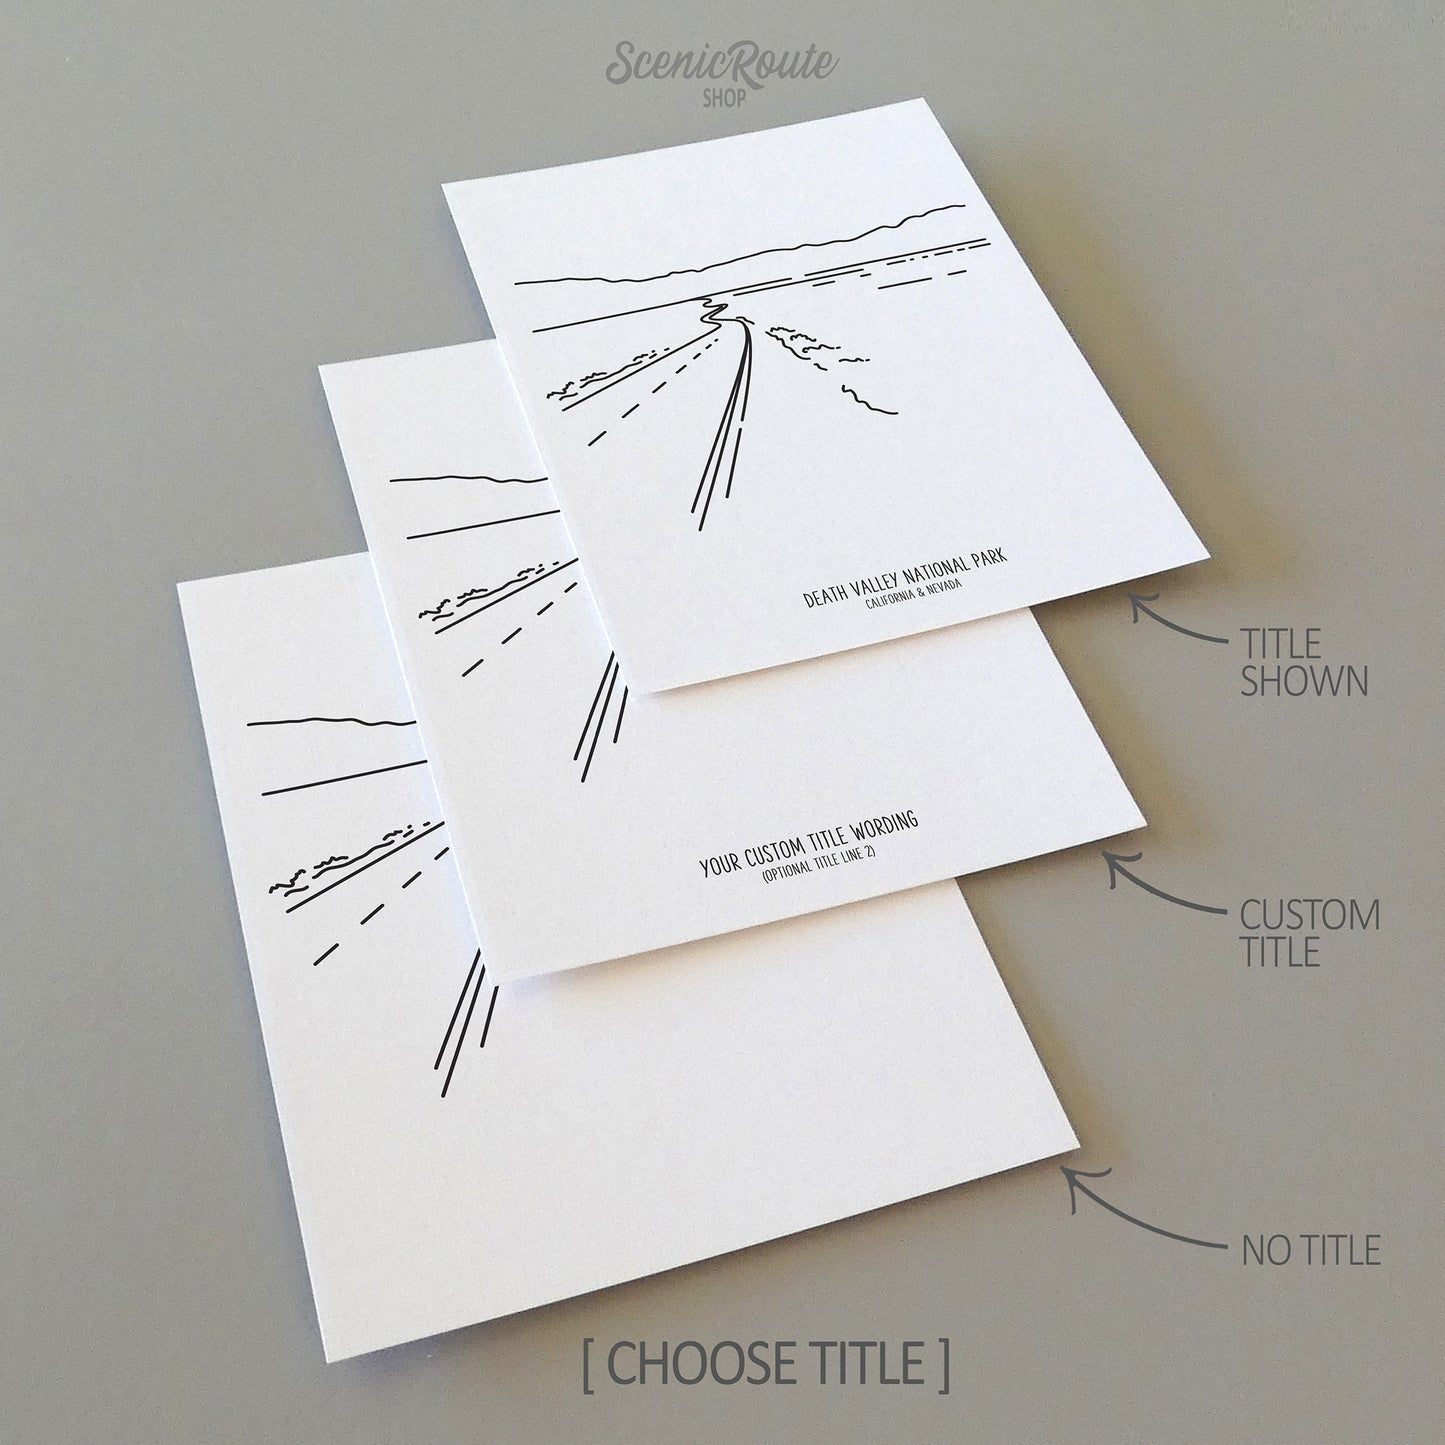 Three line art drawings of Death Valley National Park on white linen paper with a gray background. The pieces are shown with title options that can be chosen and personalized.